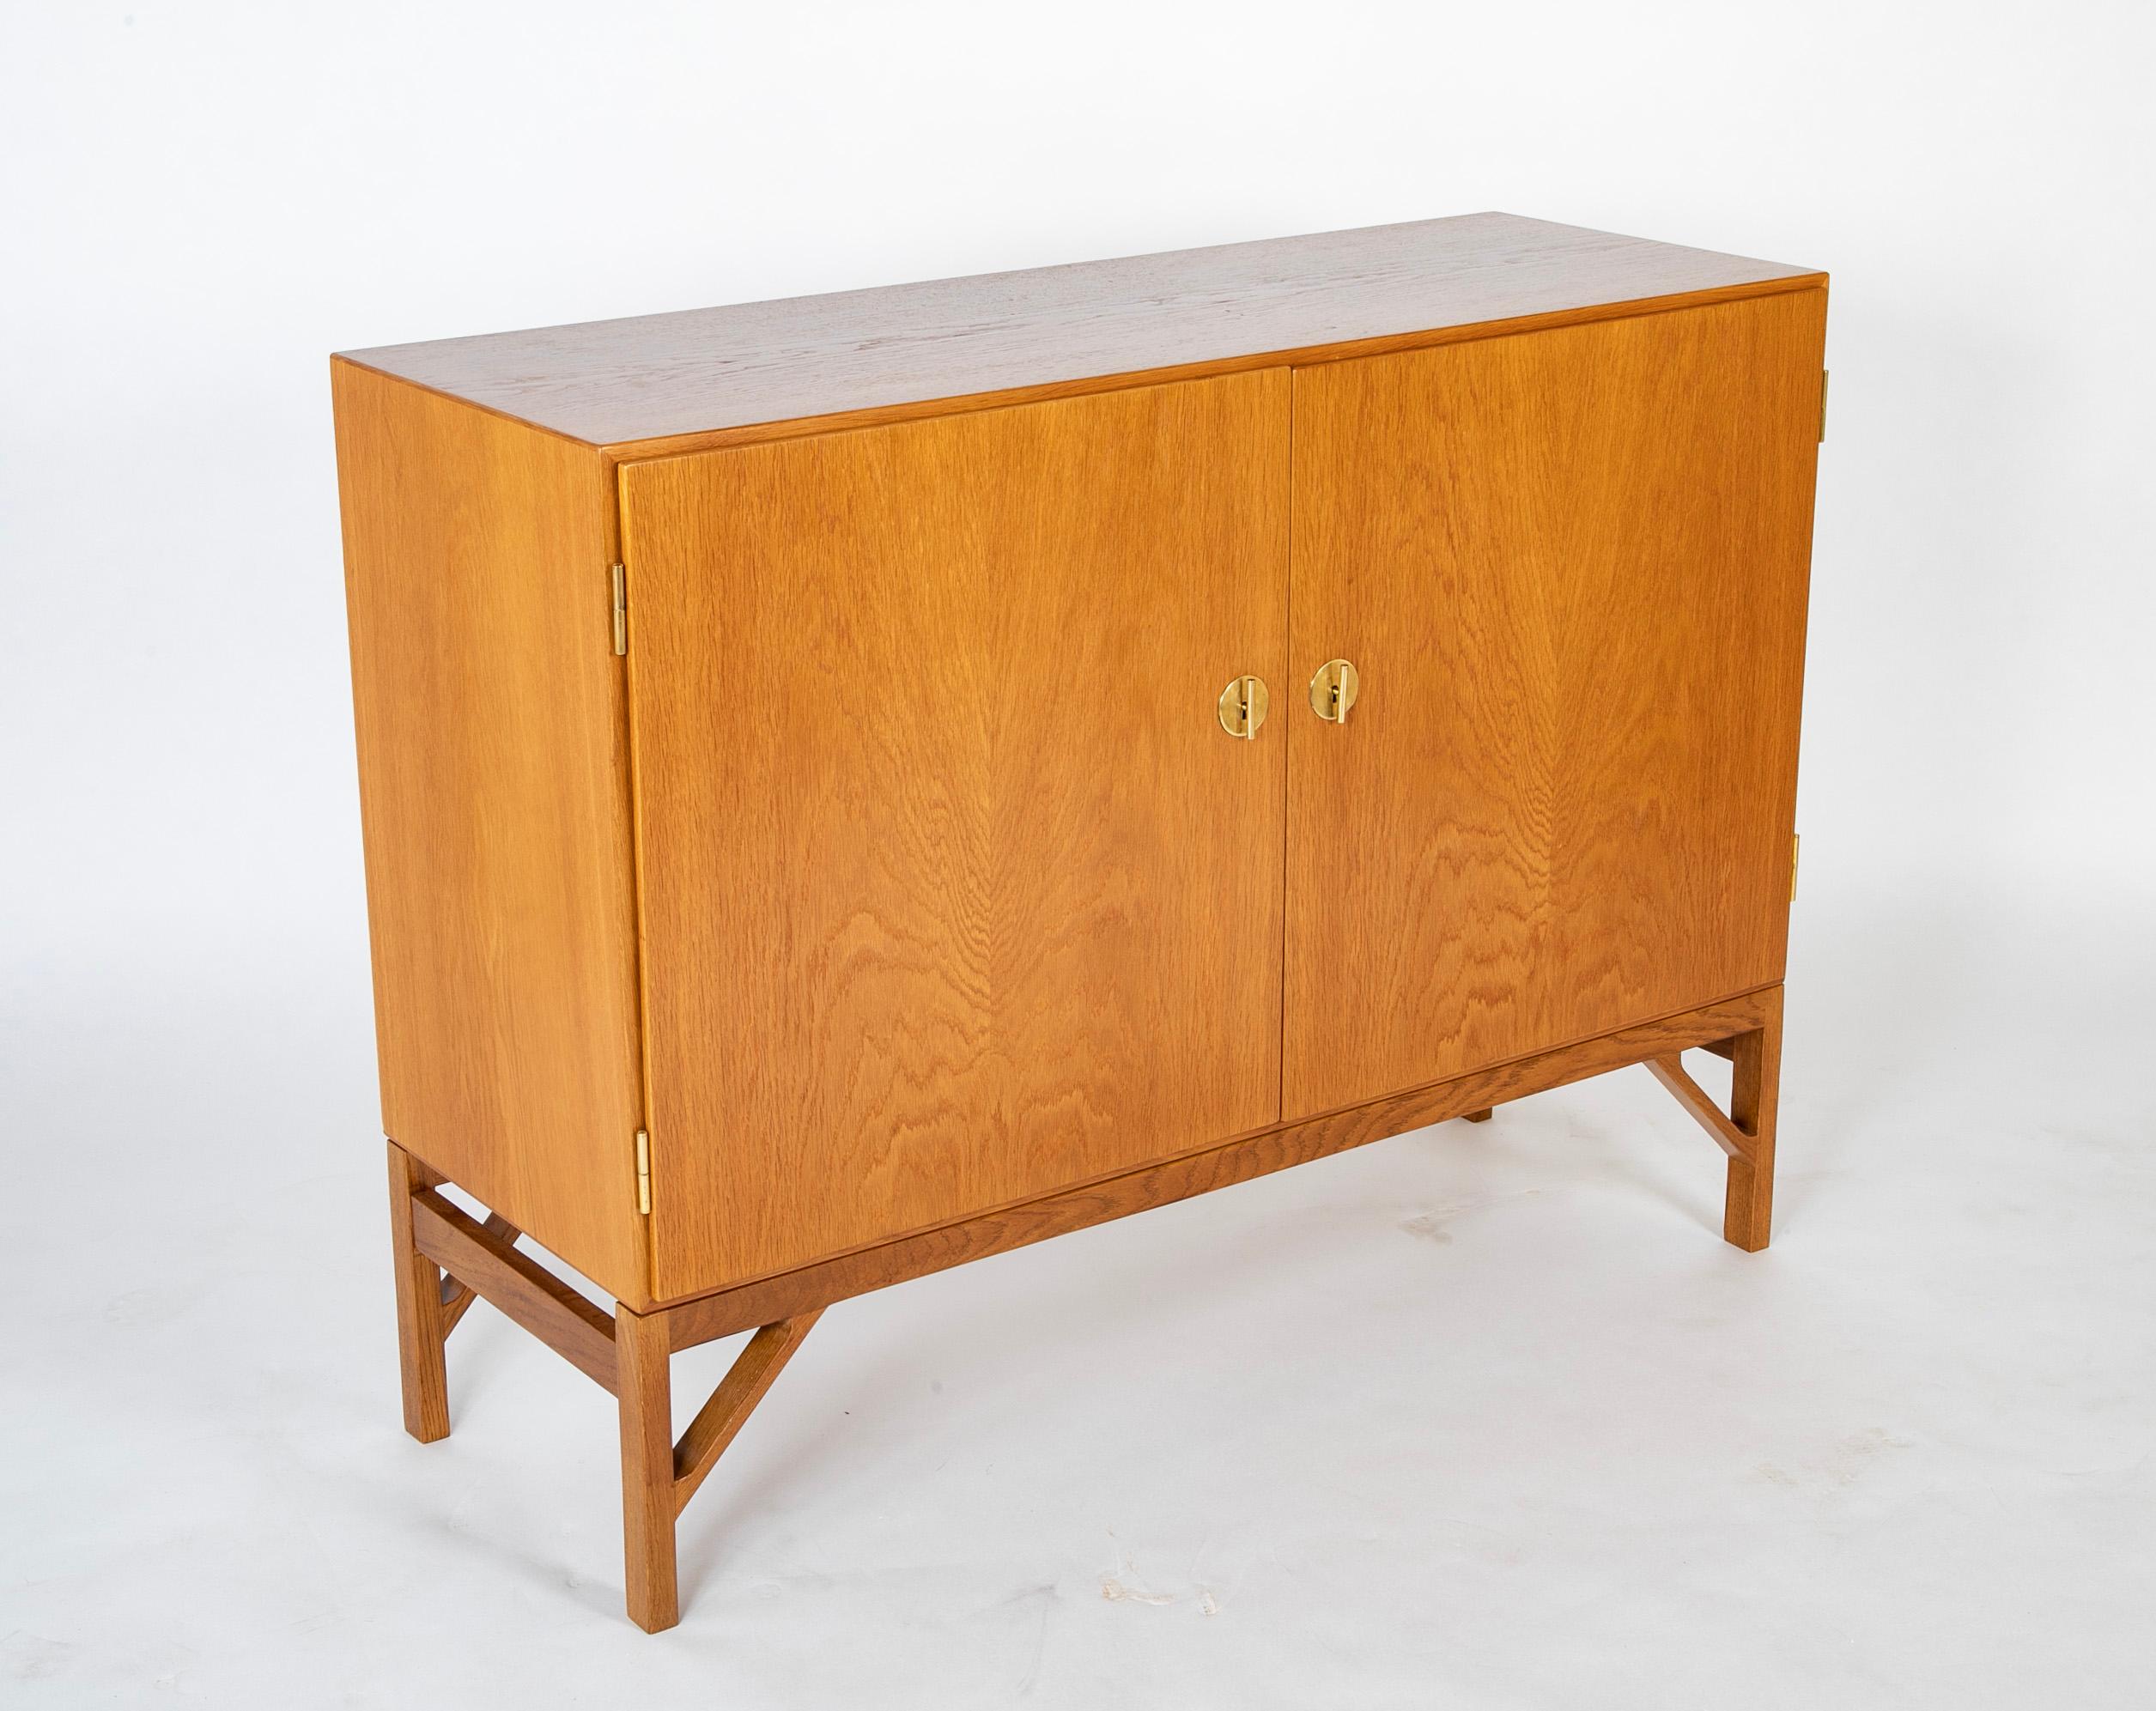 Oak cabinet, model 232, also known as 'China' cabinet, designed by Børge Mogensen and produced by FDB in Denmark.  Front with two doors and brass keys that also serve as handles. Inside with shelves and pullout trays. Manufactured and marked by C.M.